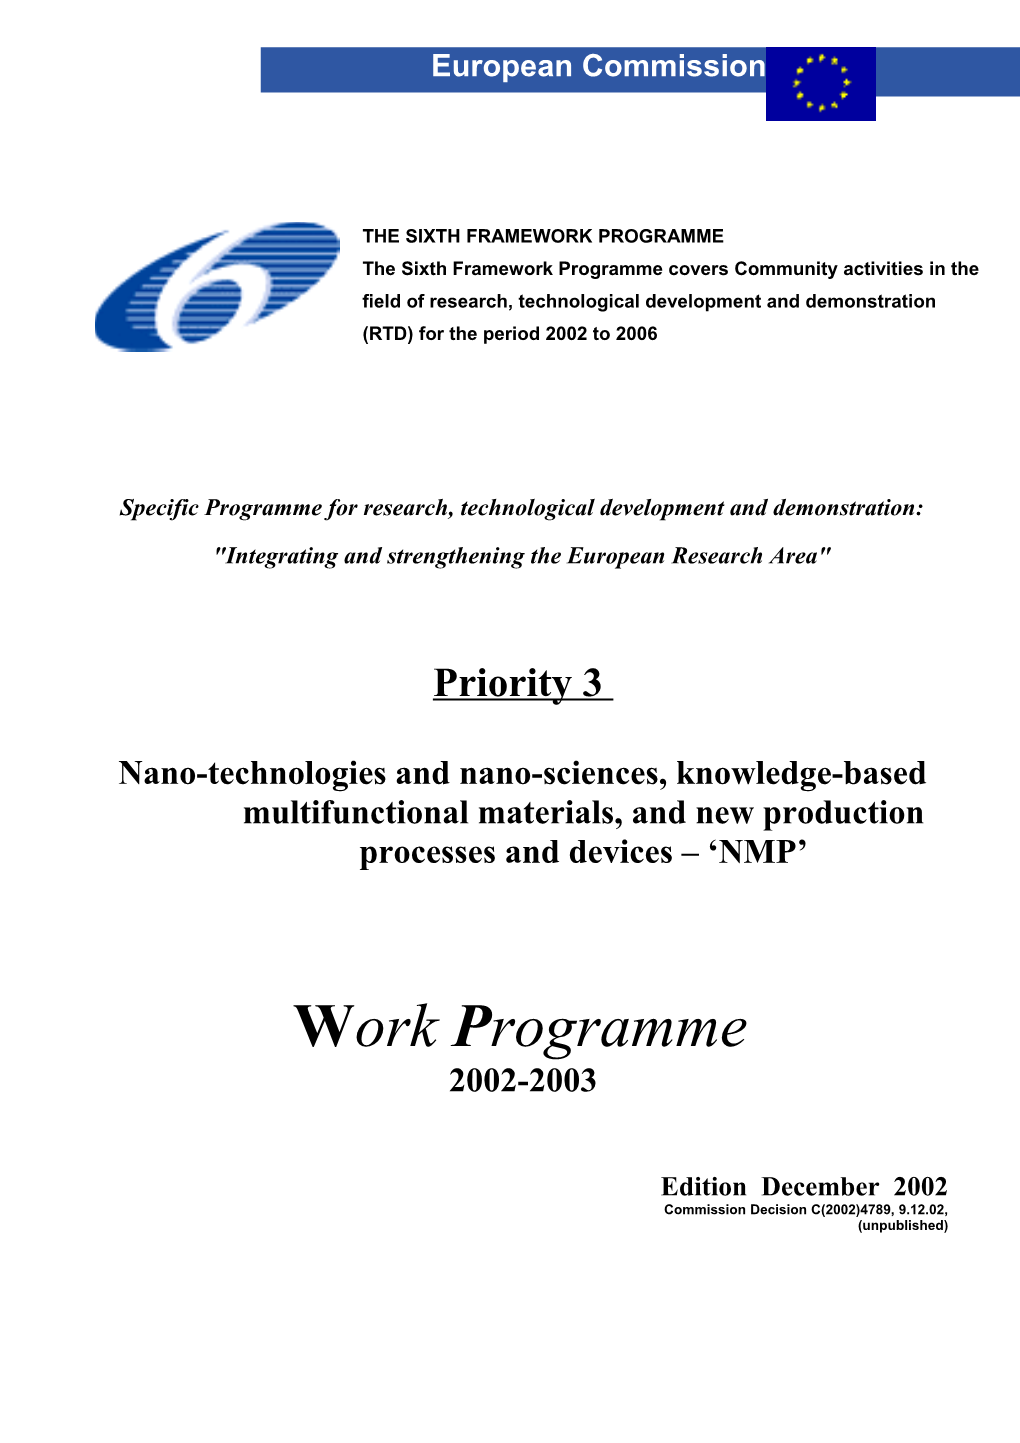 Specific Programme for Research, Technological Development and Demonstration